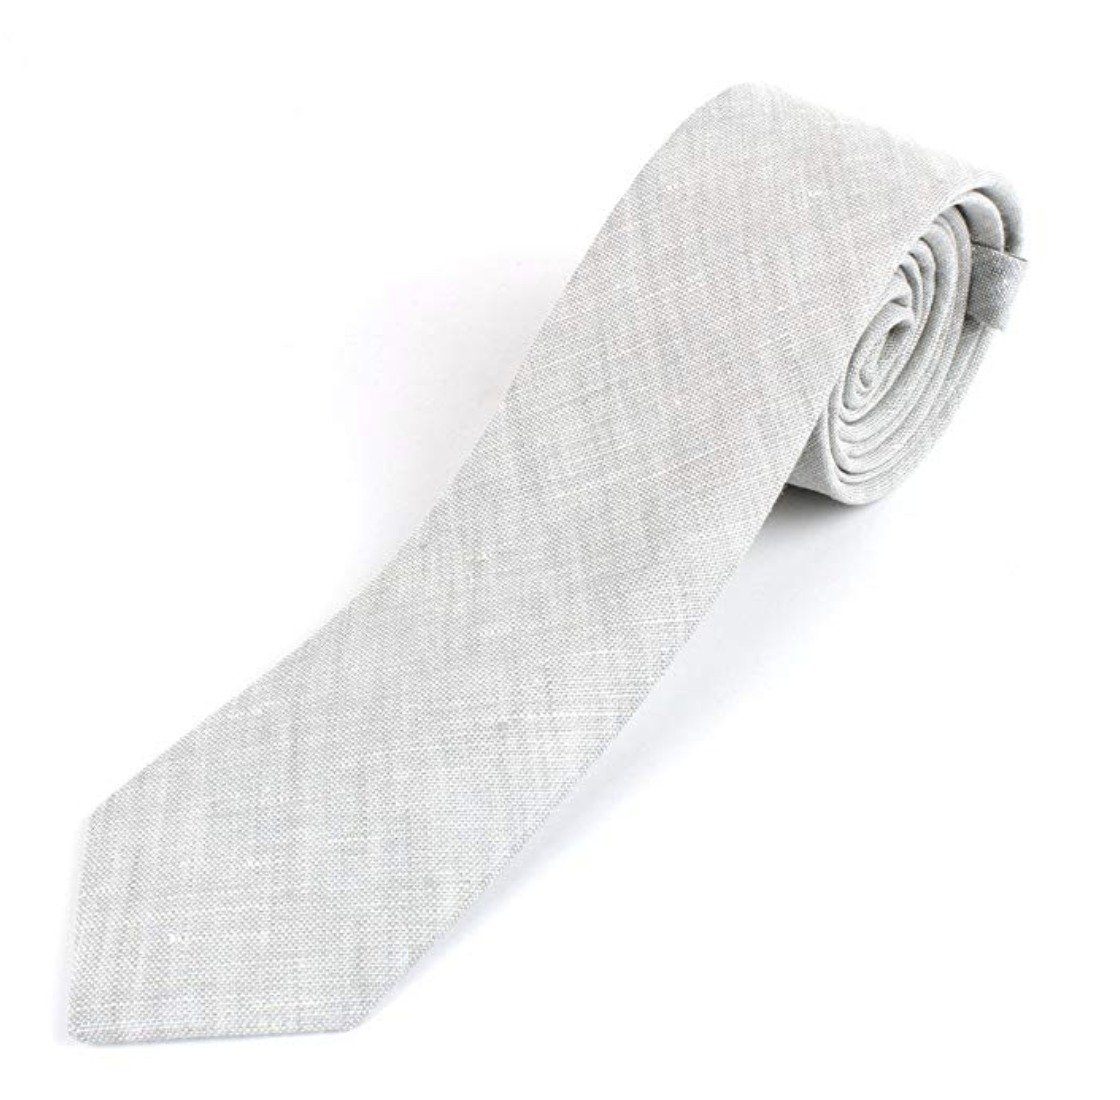 cotton-second-anniversary-gifts-tie